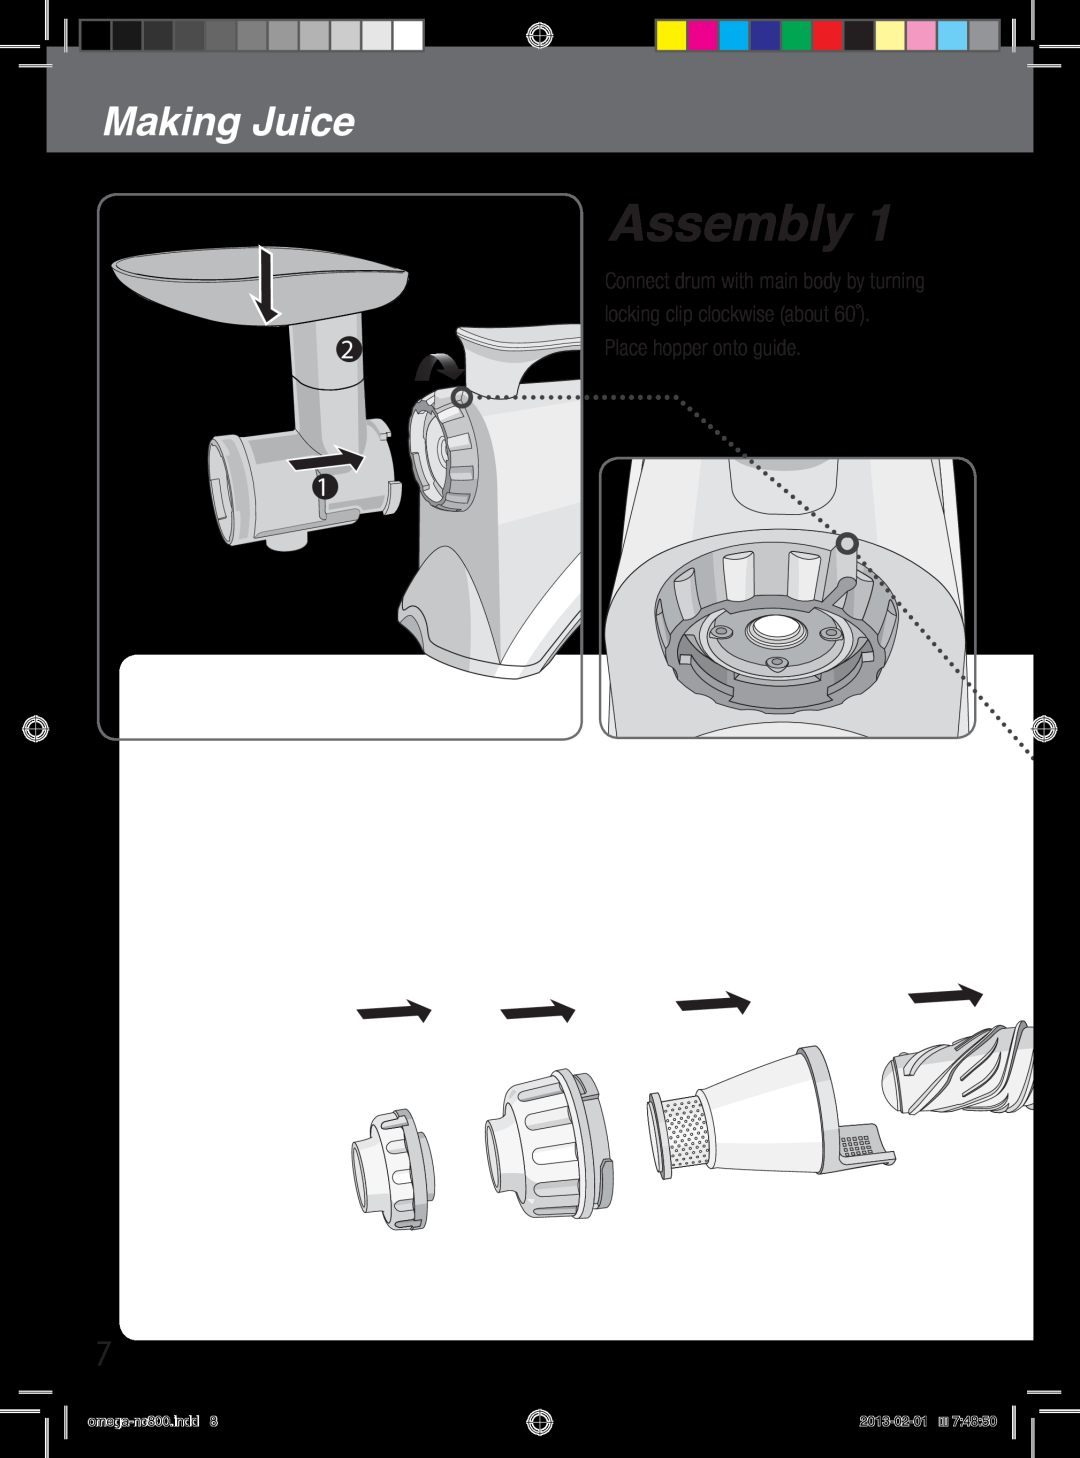 Omega NC800 AssemblyMaking JuiceInstructions, locking clip clockwise about 60˚, Connect drum with main body by turning 